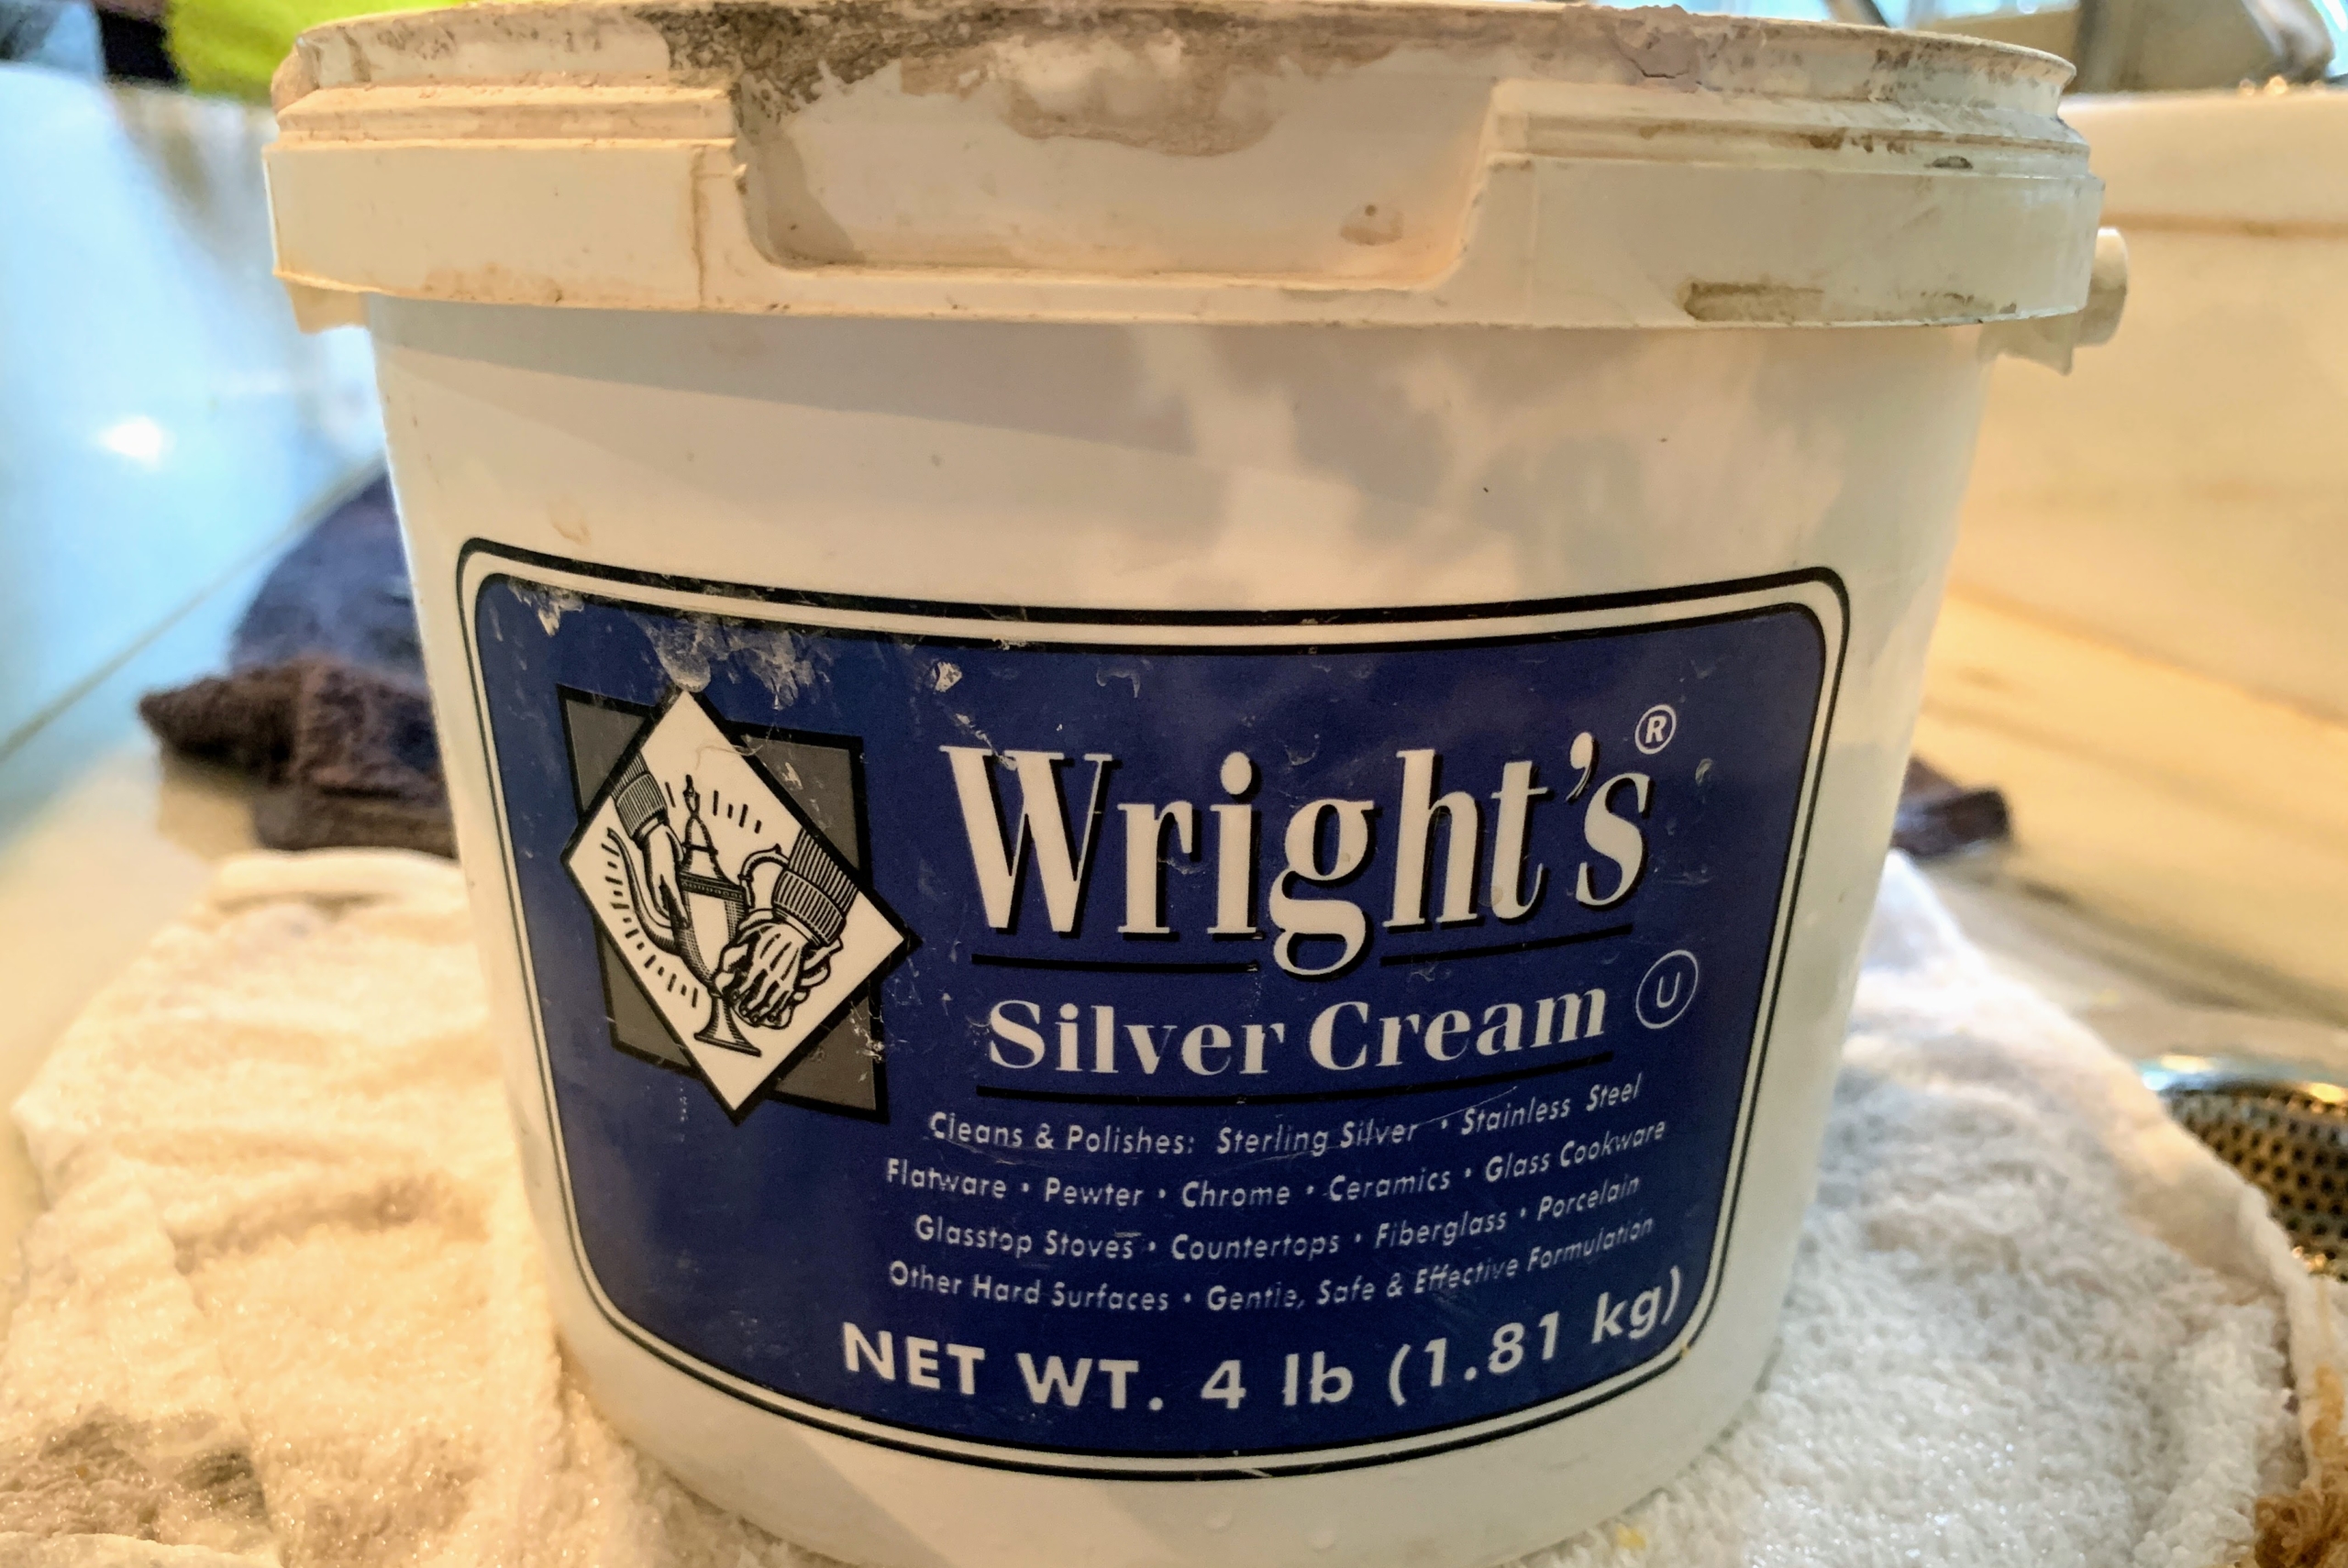  Wright's Silver Cleaner and Polish Cream - 8 Ounce with  Polishing Cloth - Ammonia-Free - Gently Clean and Remove Tarnish without  Scratching : Health & Household